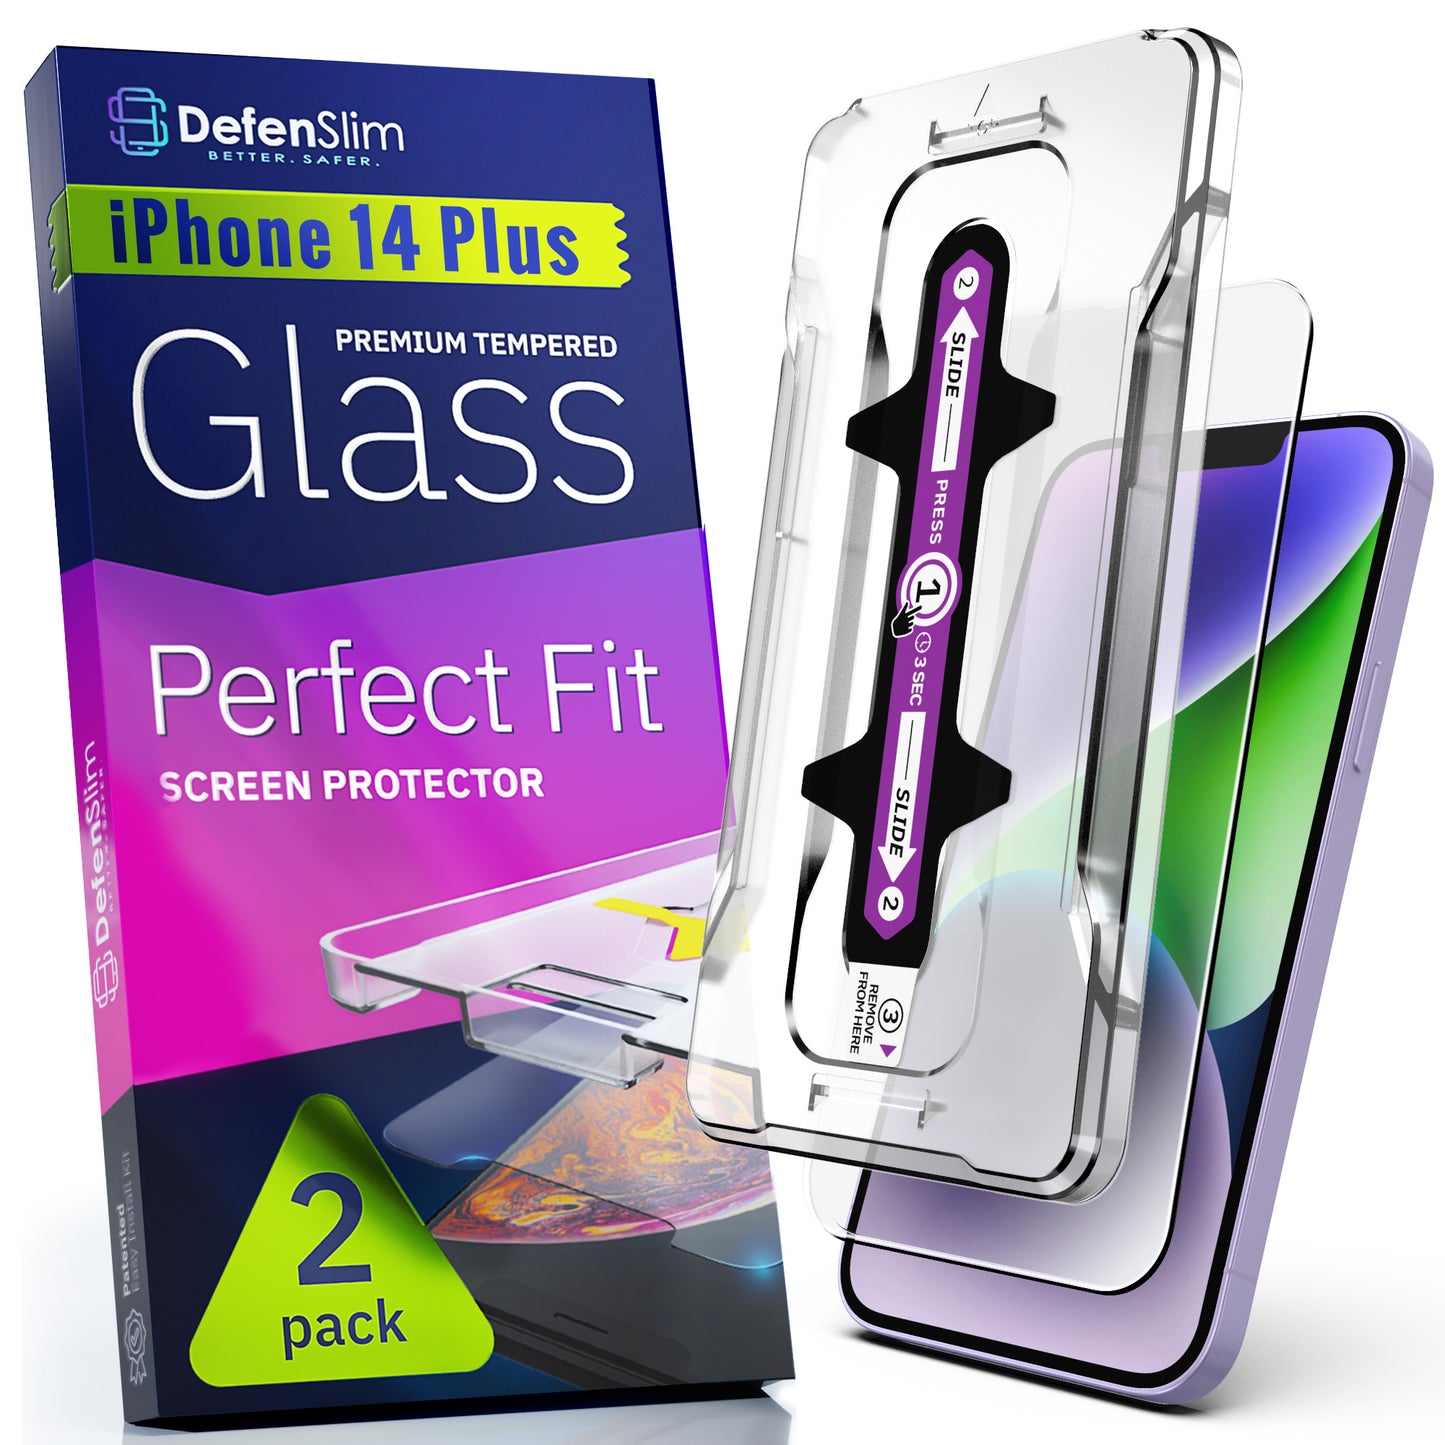 Defenslim iPhone 14 Plus Screen Protector [2-Pack] with Easy Auto-Align Install Kit